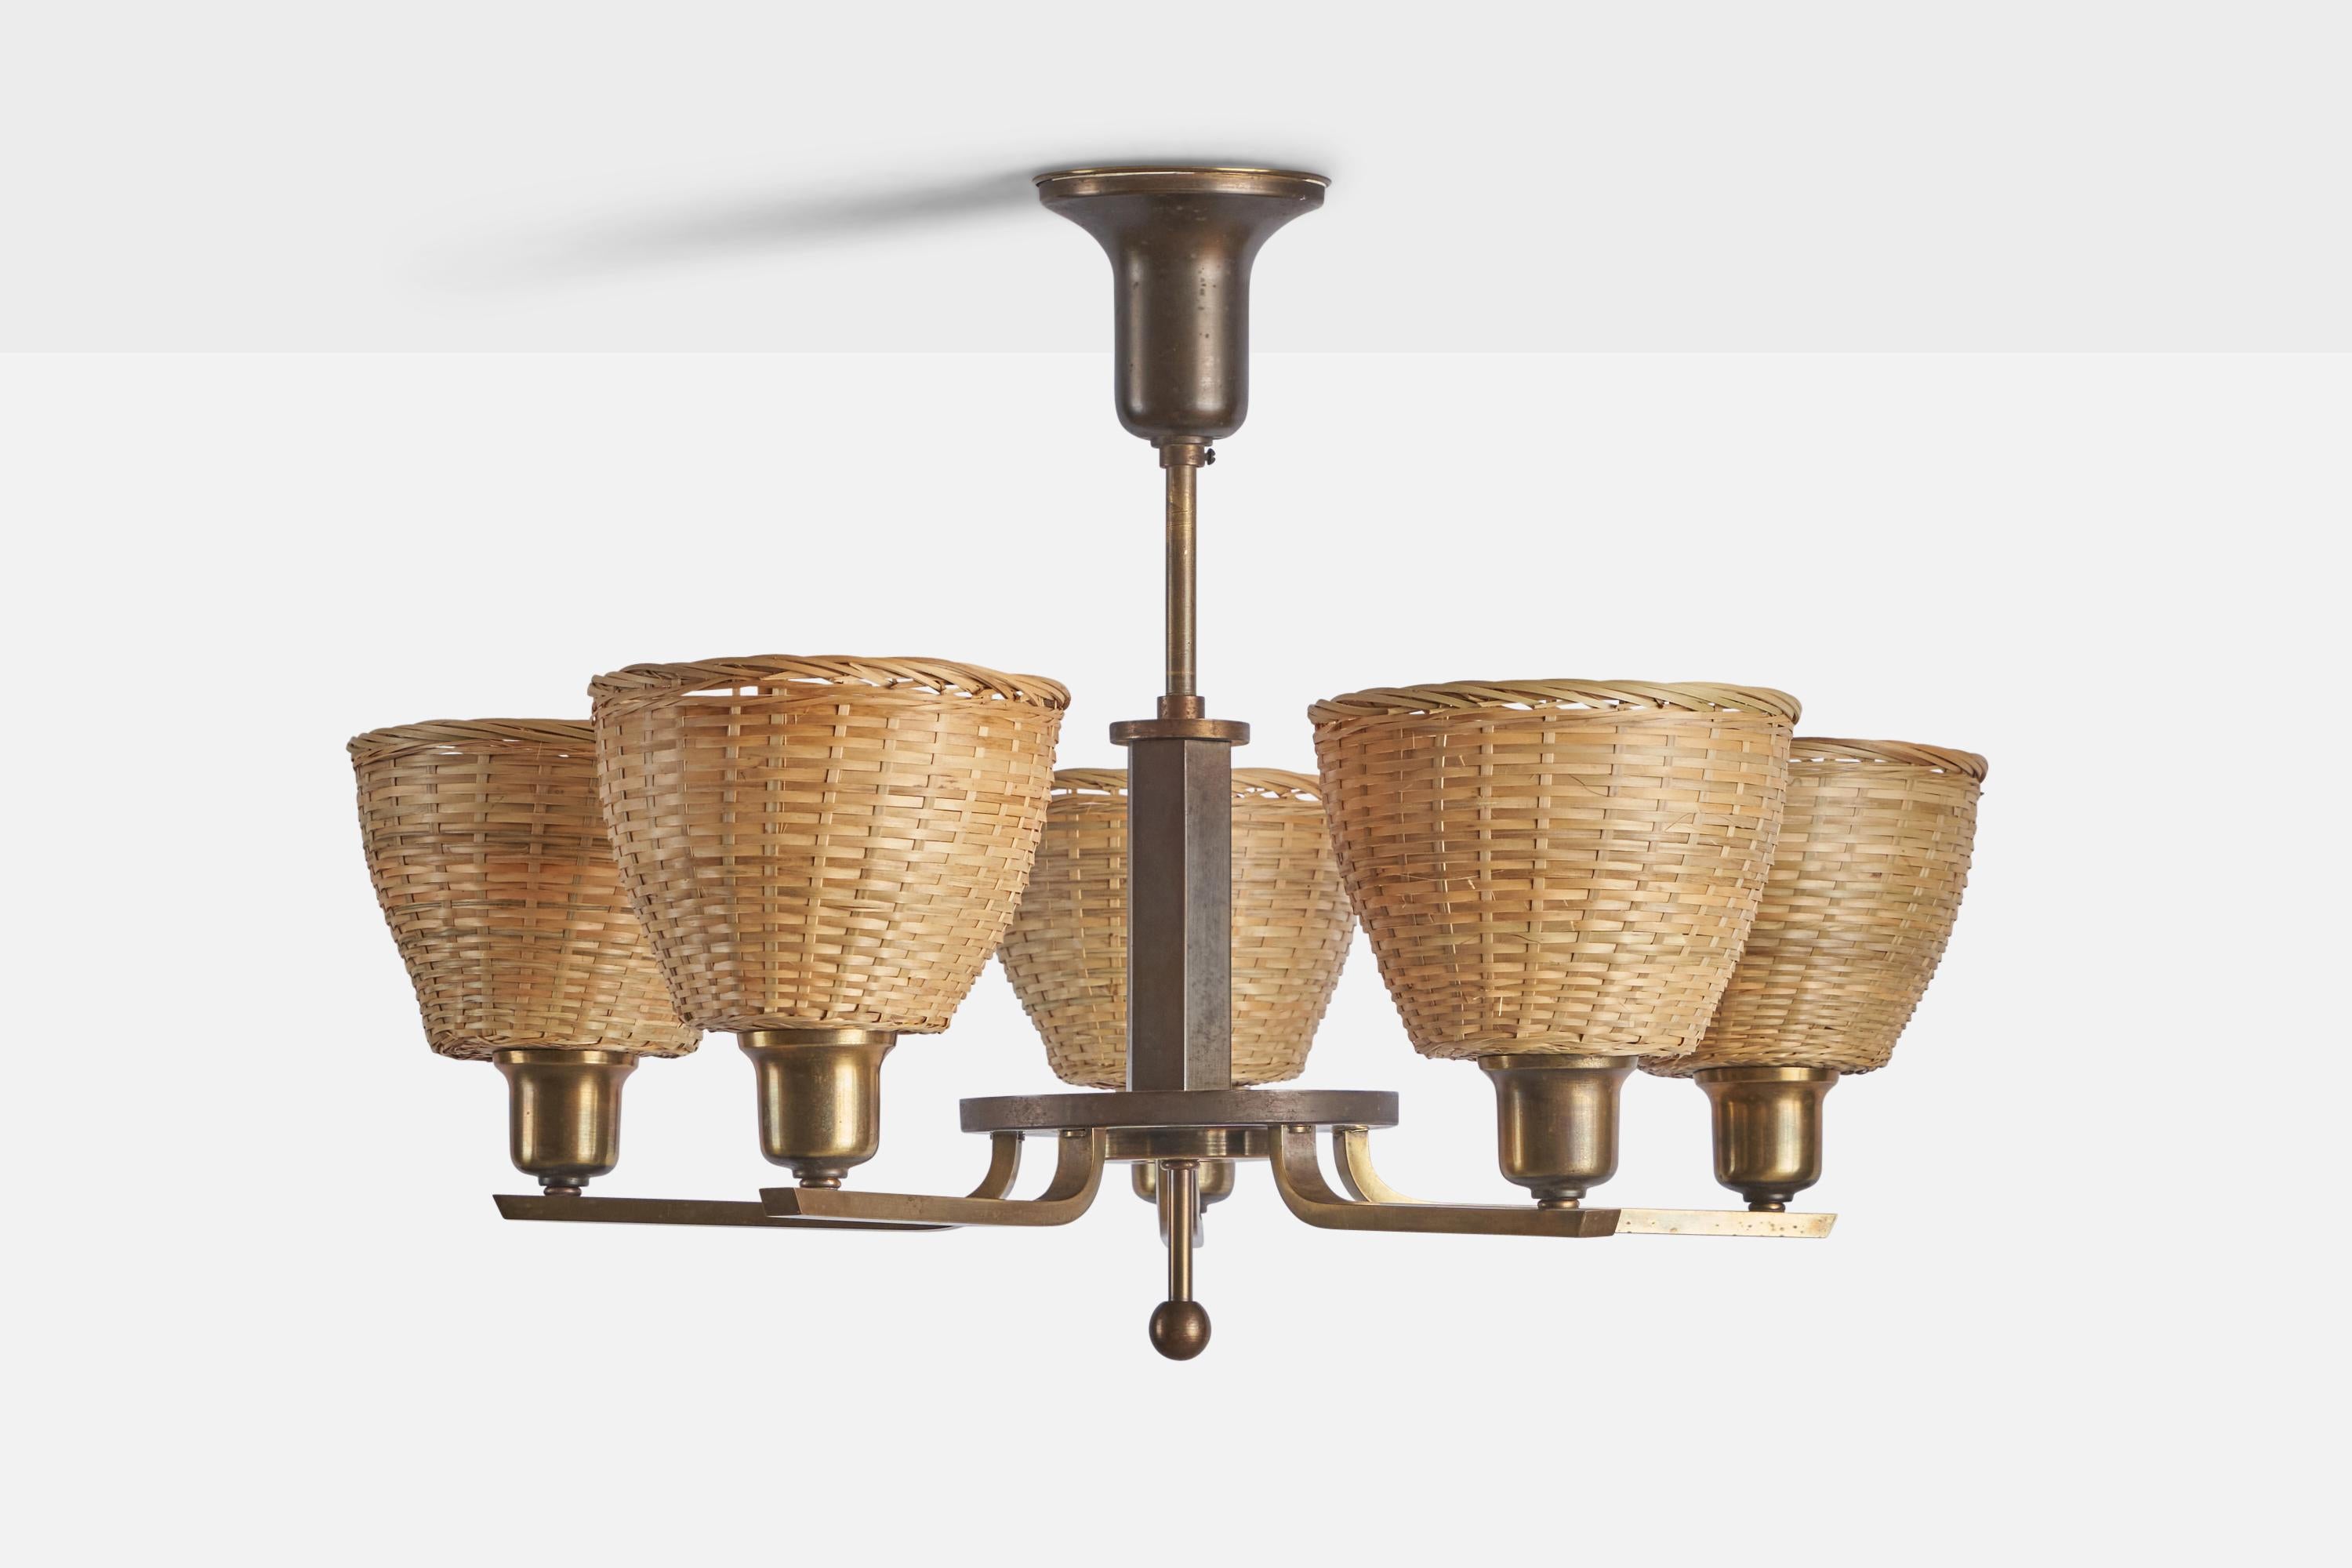 A brass and rattan chandelier, designed by Paavo Tynell and produced by Taito OY, Finland, 1940s.

Overall Dimensions (inches): 18.5” H x 25” Diameter
Bulb Specifications: E-26 Bulb
Number of Sockets: 5
Assorted rattan lampshades